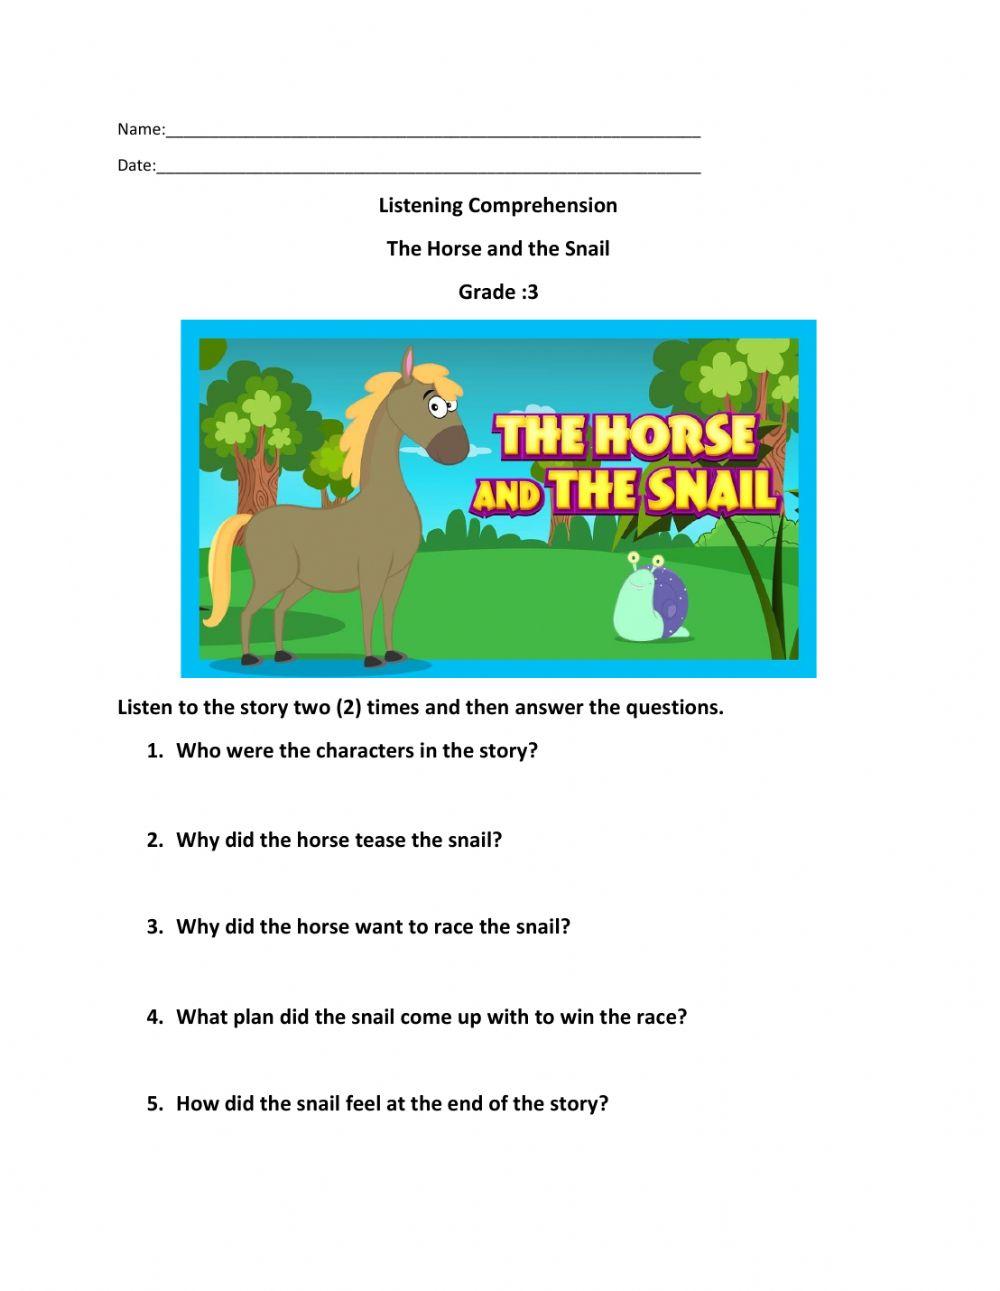 The Horse and the Snail